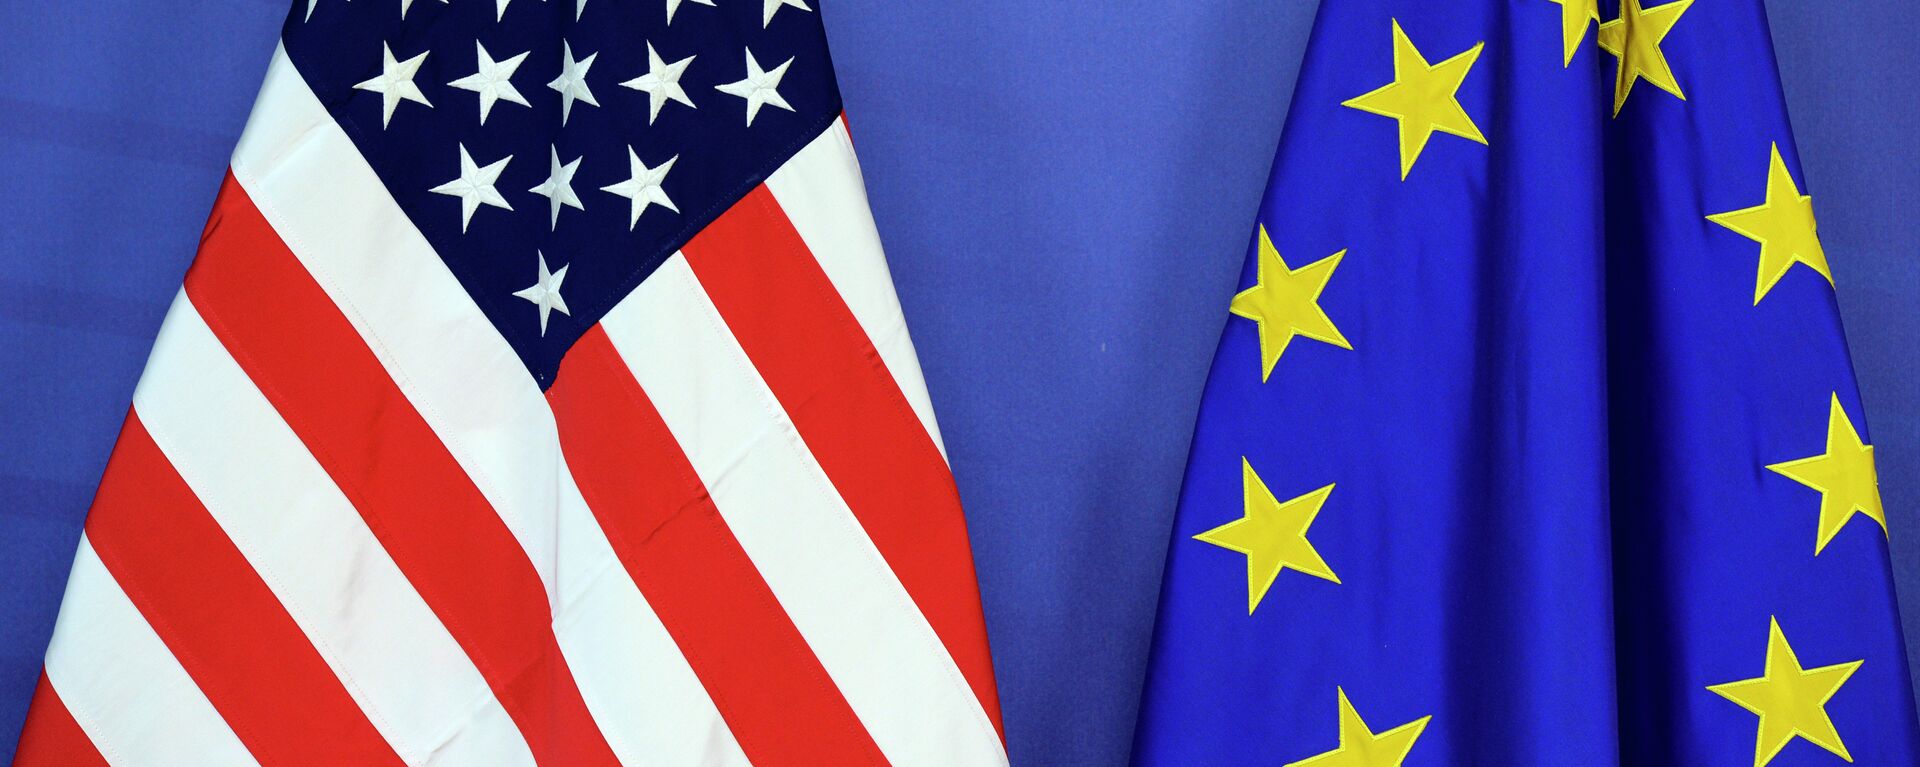 The US national flag (L) and the flag of the European Union are placed side-by-side during the Transatlantic Trade and Investment Partnership (TTIP) meeting at the European Union Commission headquarter in Brussels, on July 13, 2015 - Sputnik Mundo, 1920, 24.03.2021